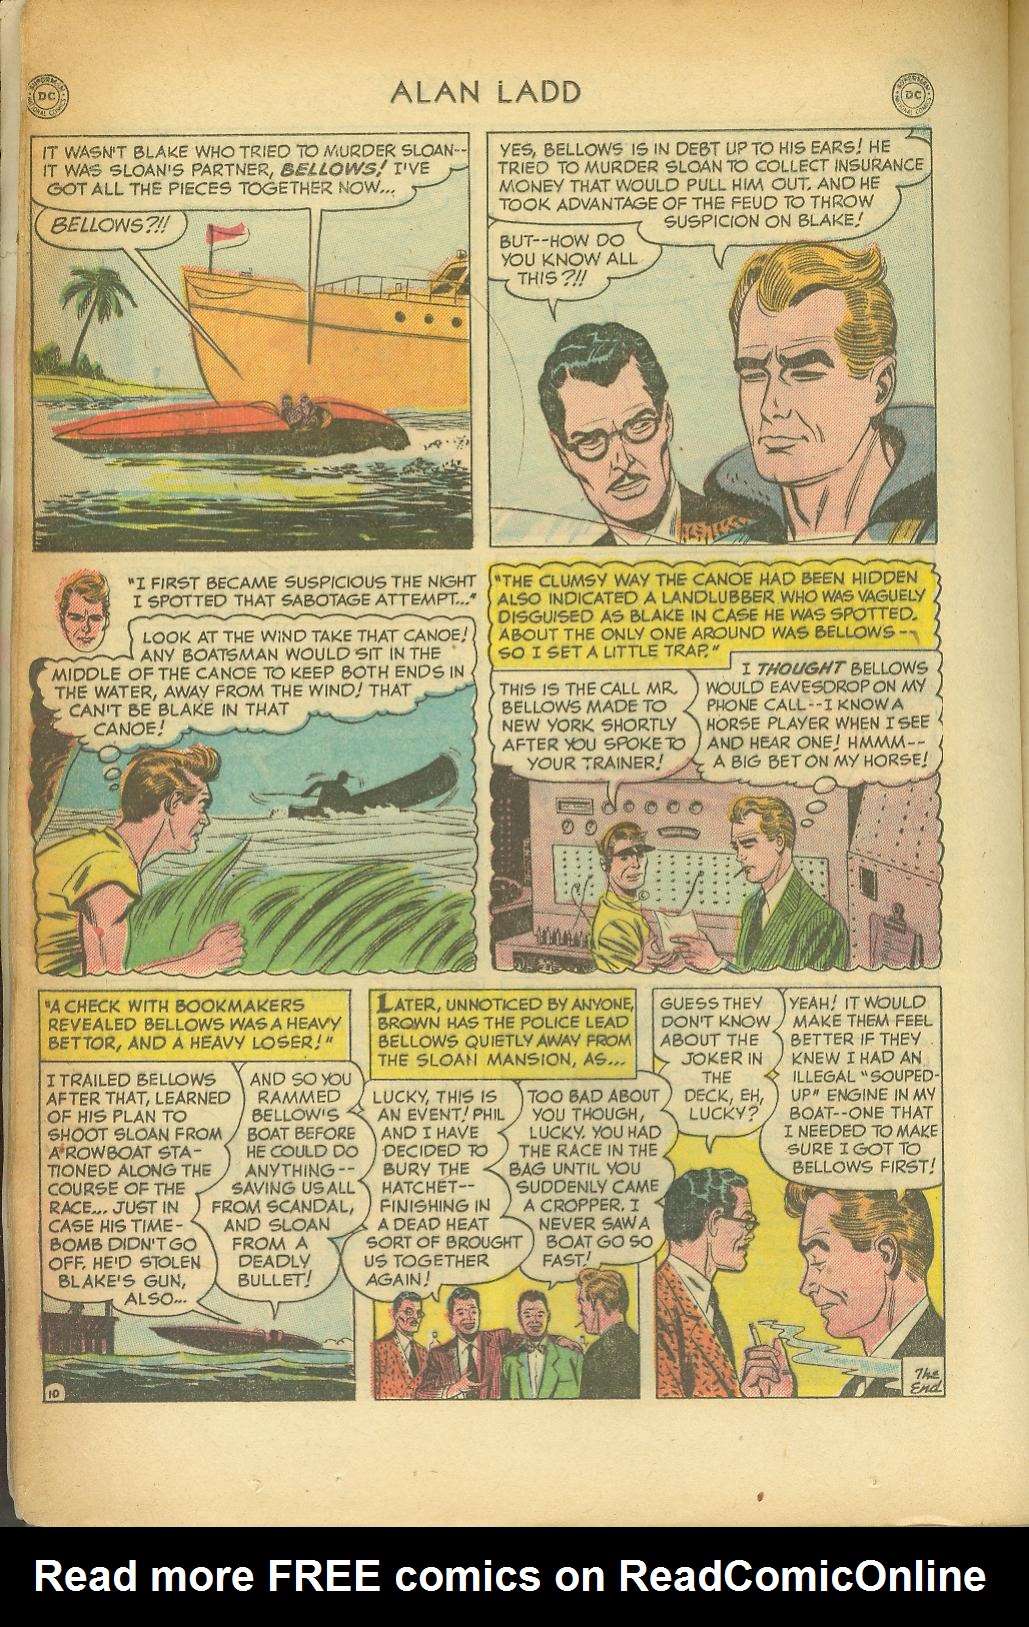 Read online Adventures of Alan Ladd comic -  Issue #8 - 30